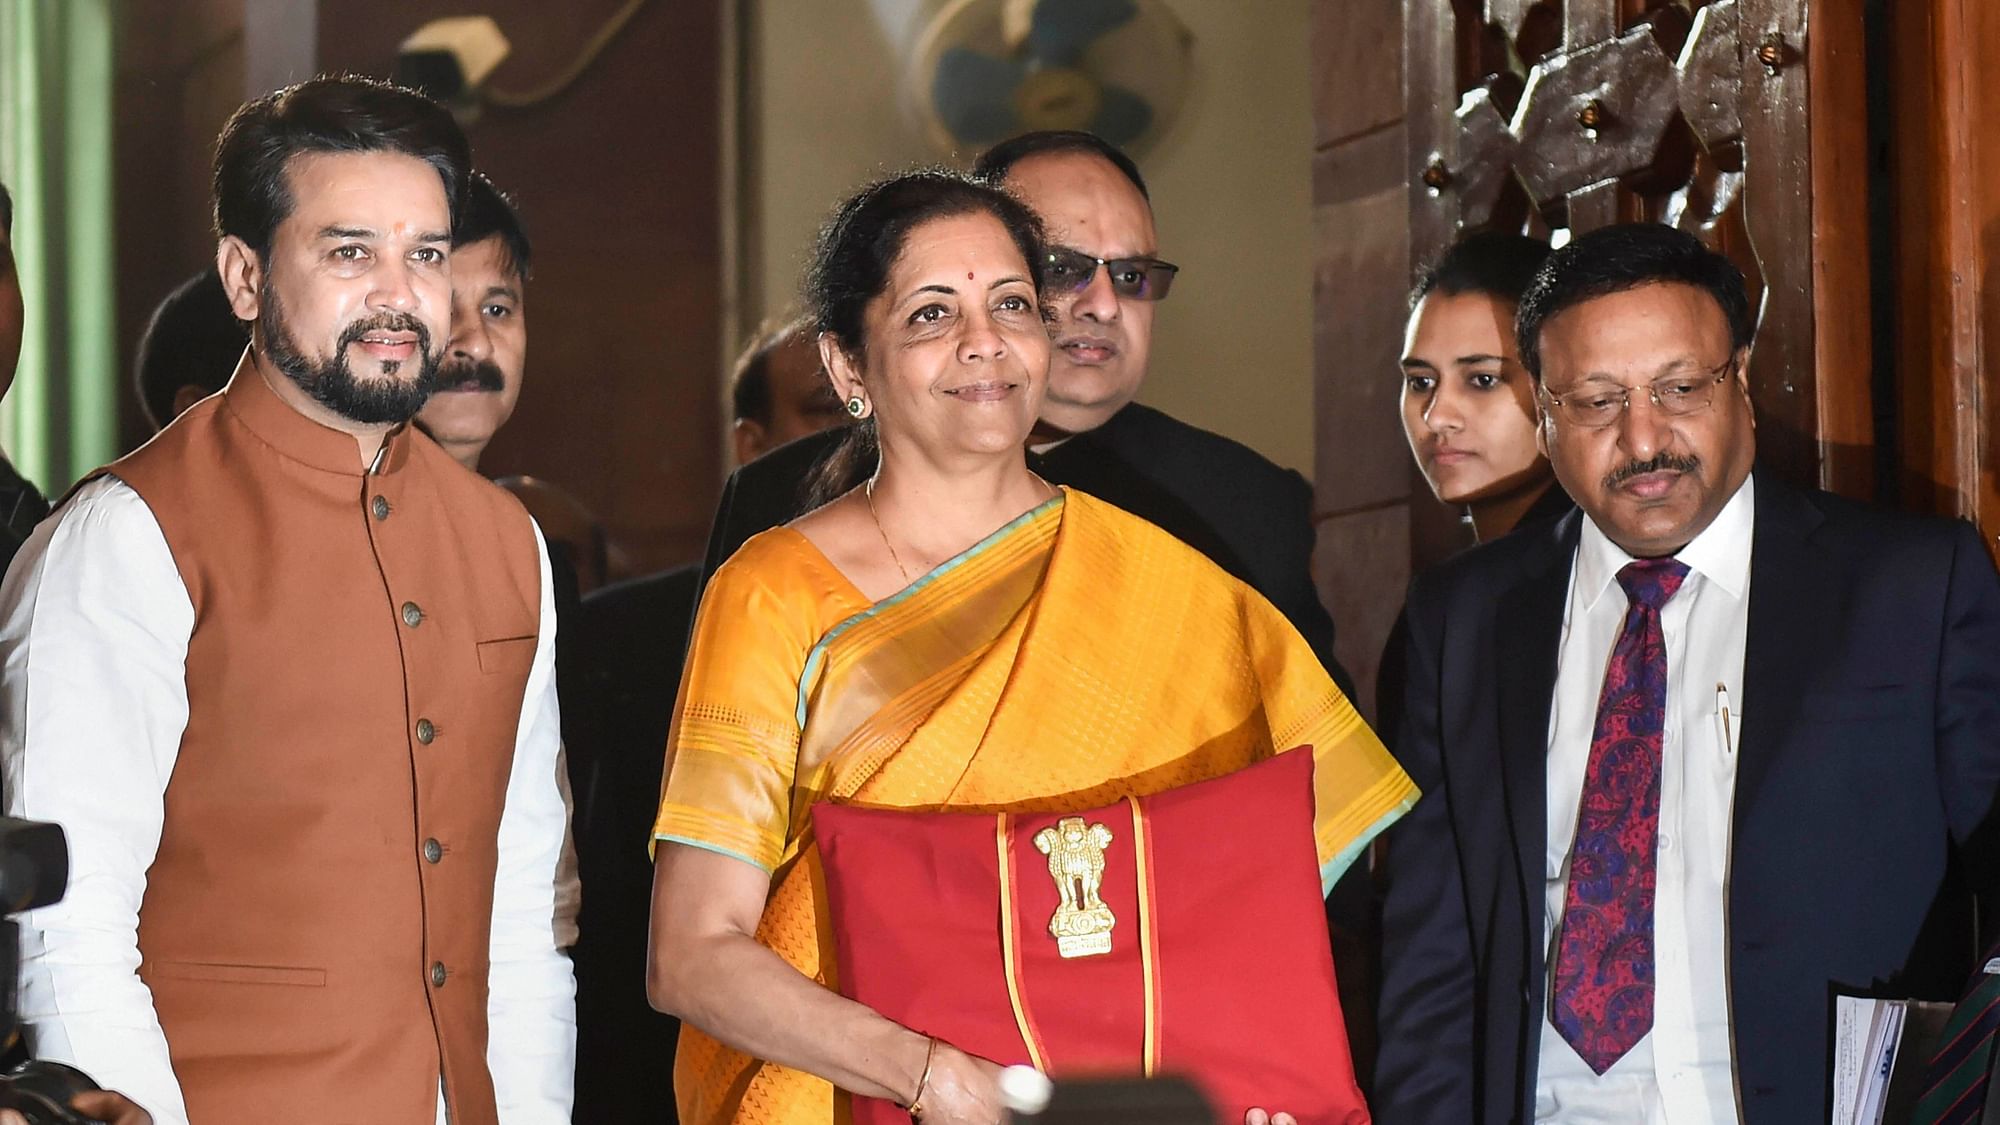 Presenting Budget 2020 in Parliament, Sitharaman said that the GST was a historic structural reform that “integrated the country economically”.